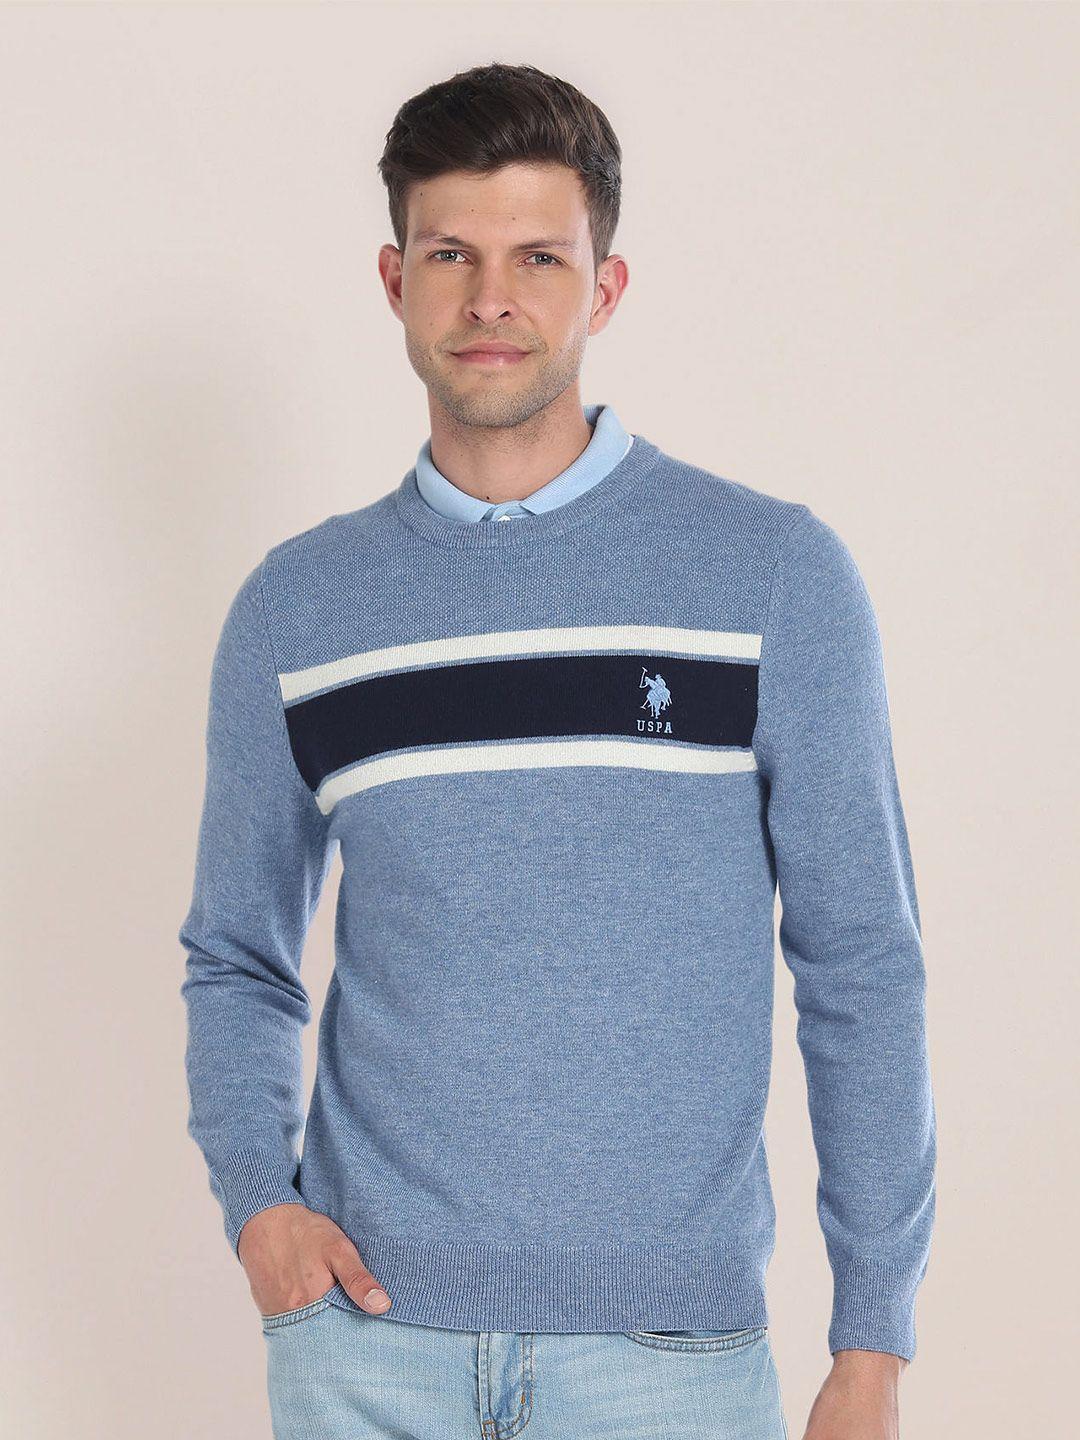 u.s. polo assn. striped round neck pullover sweater